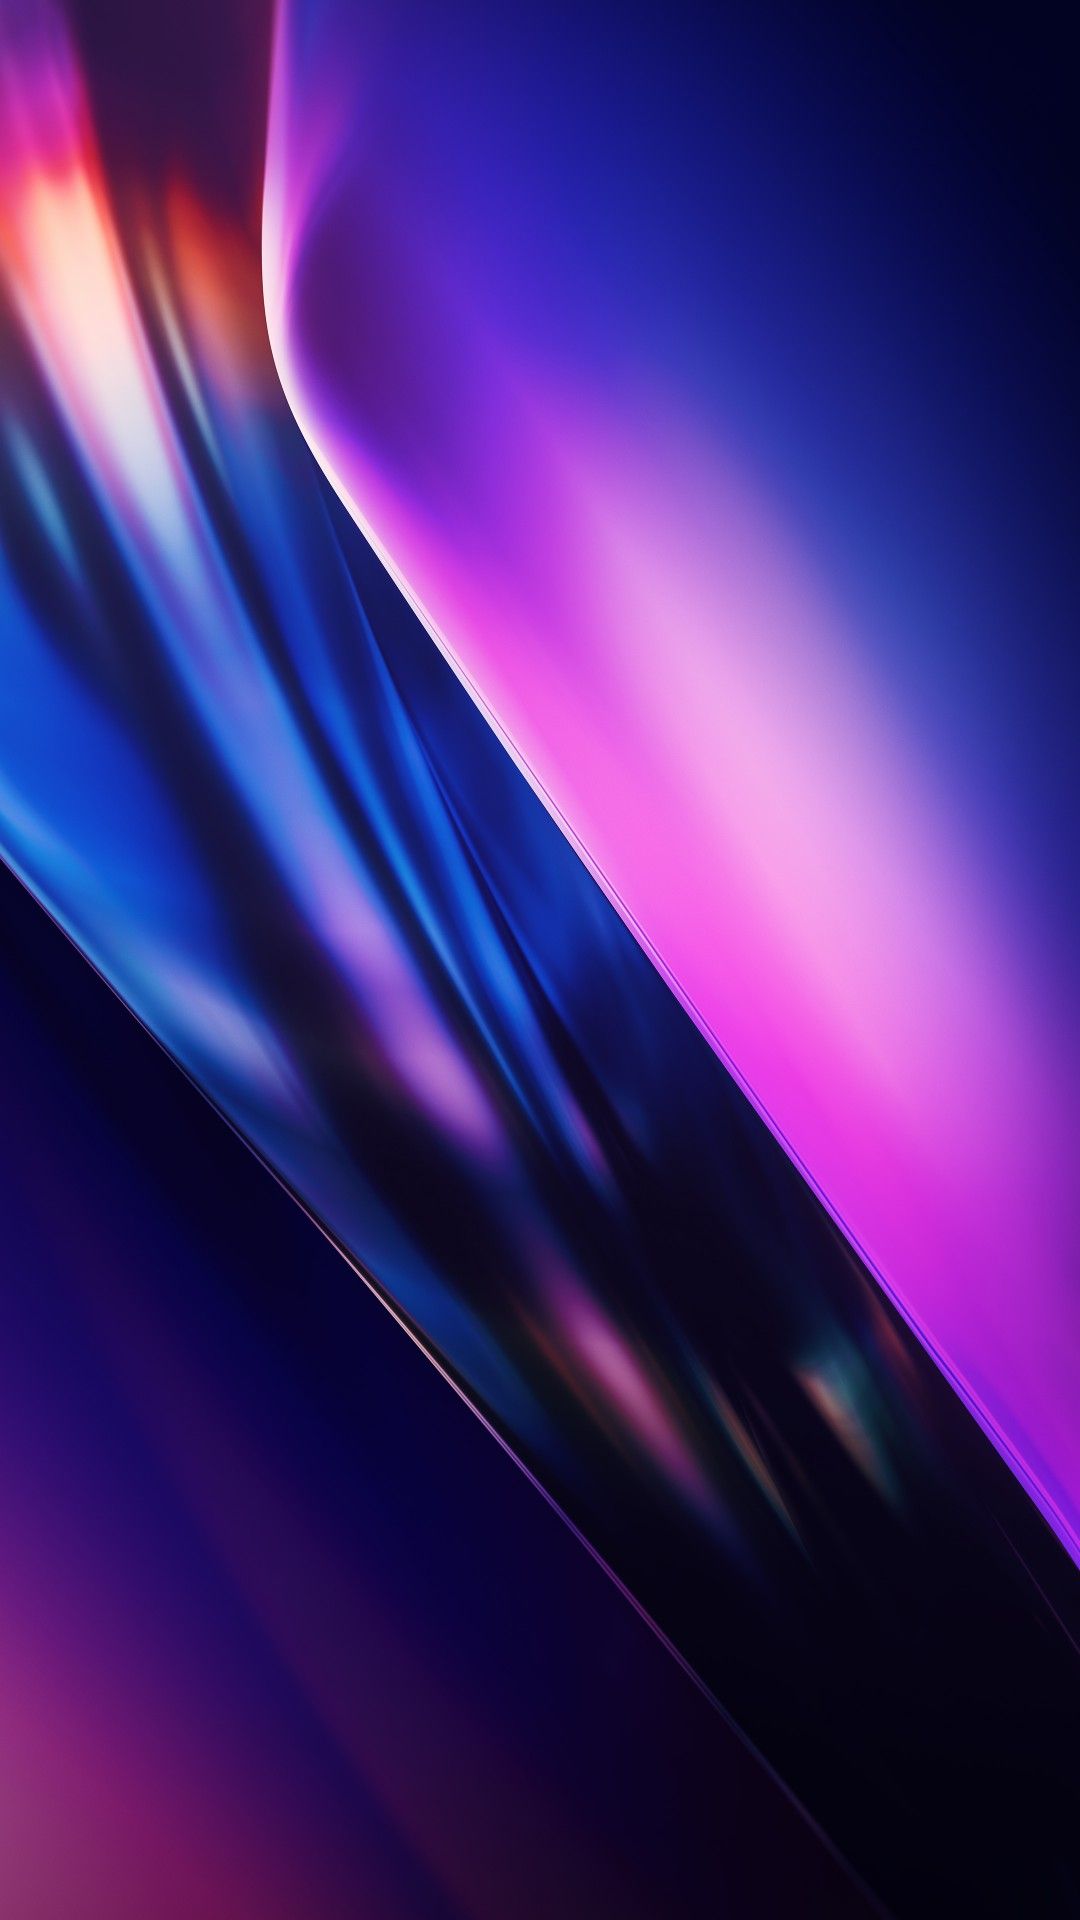 4k Ultra HD Android Wallpapers - Wallpaper Cave